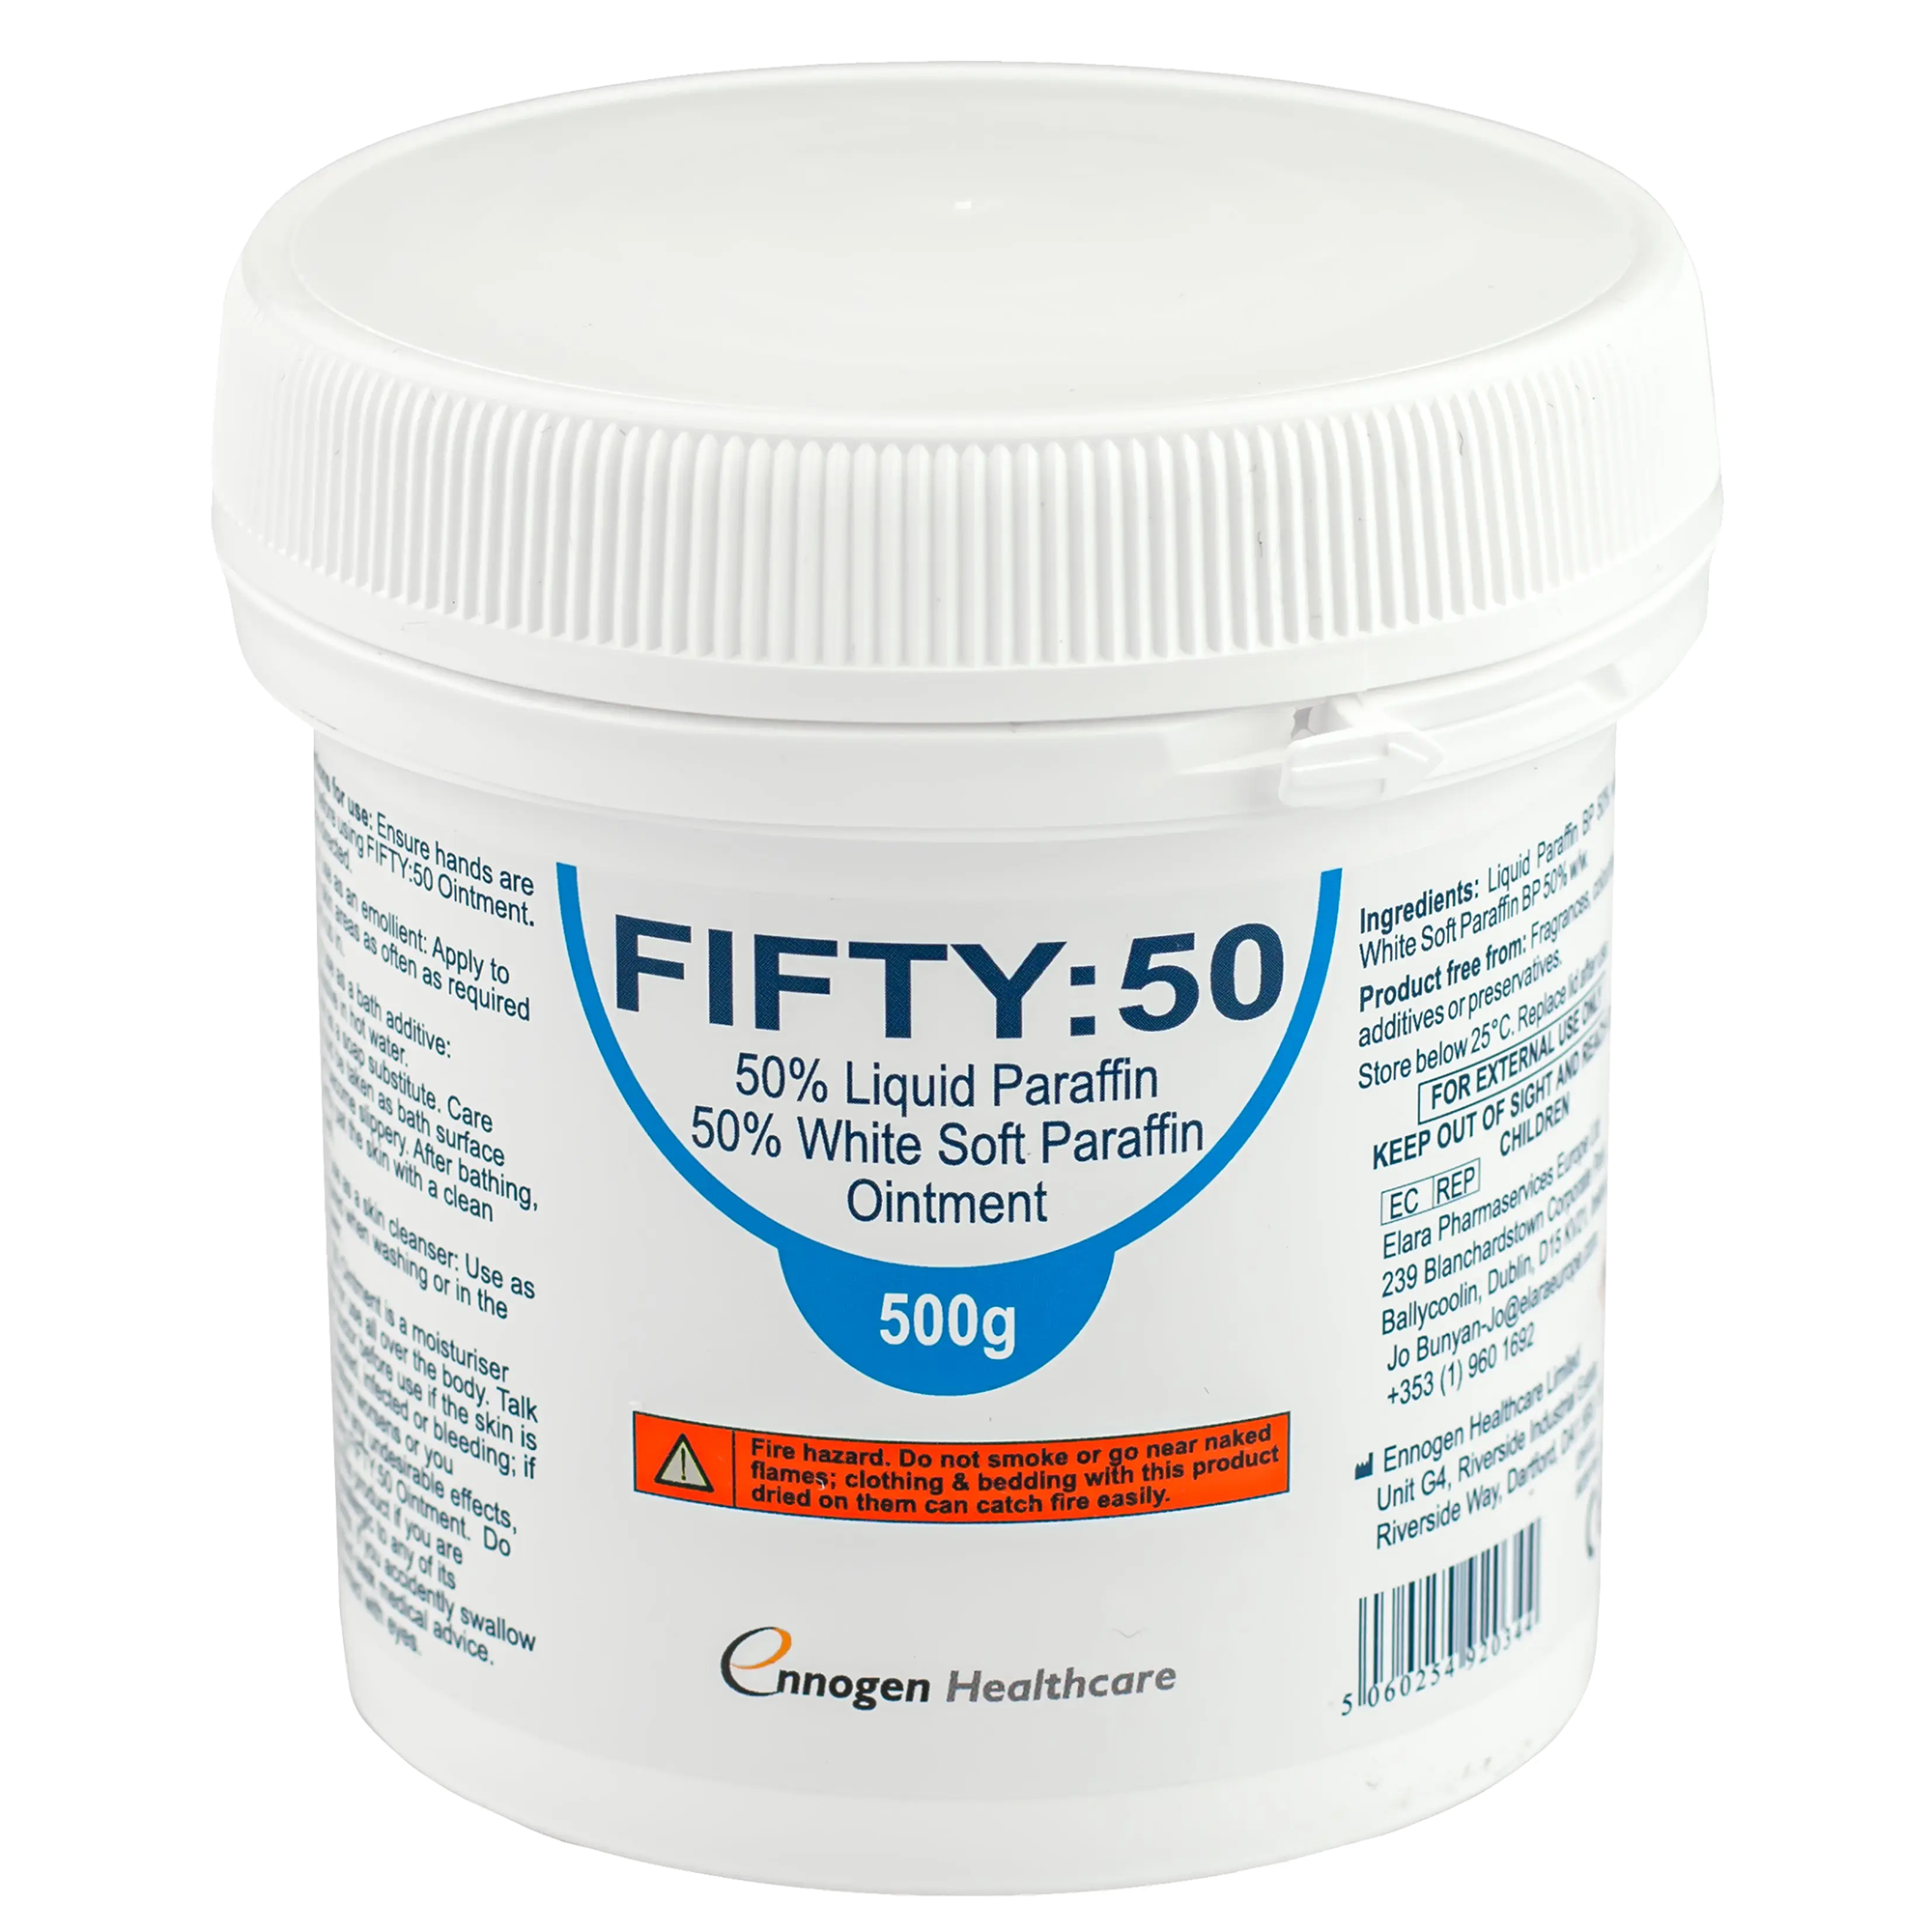 Fifty:50 Ointment